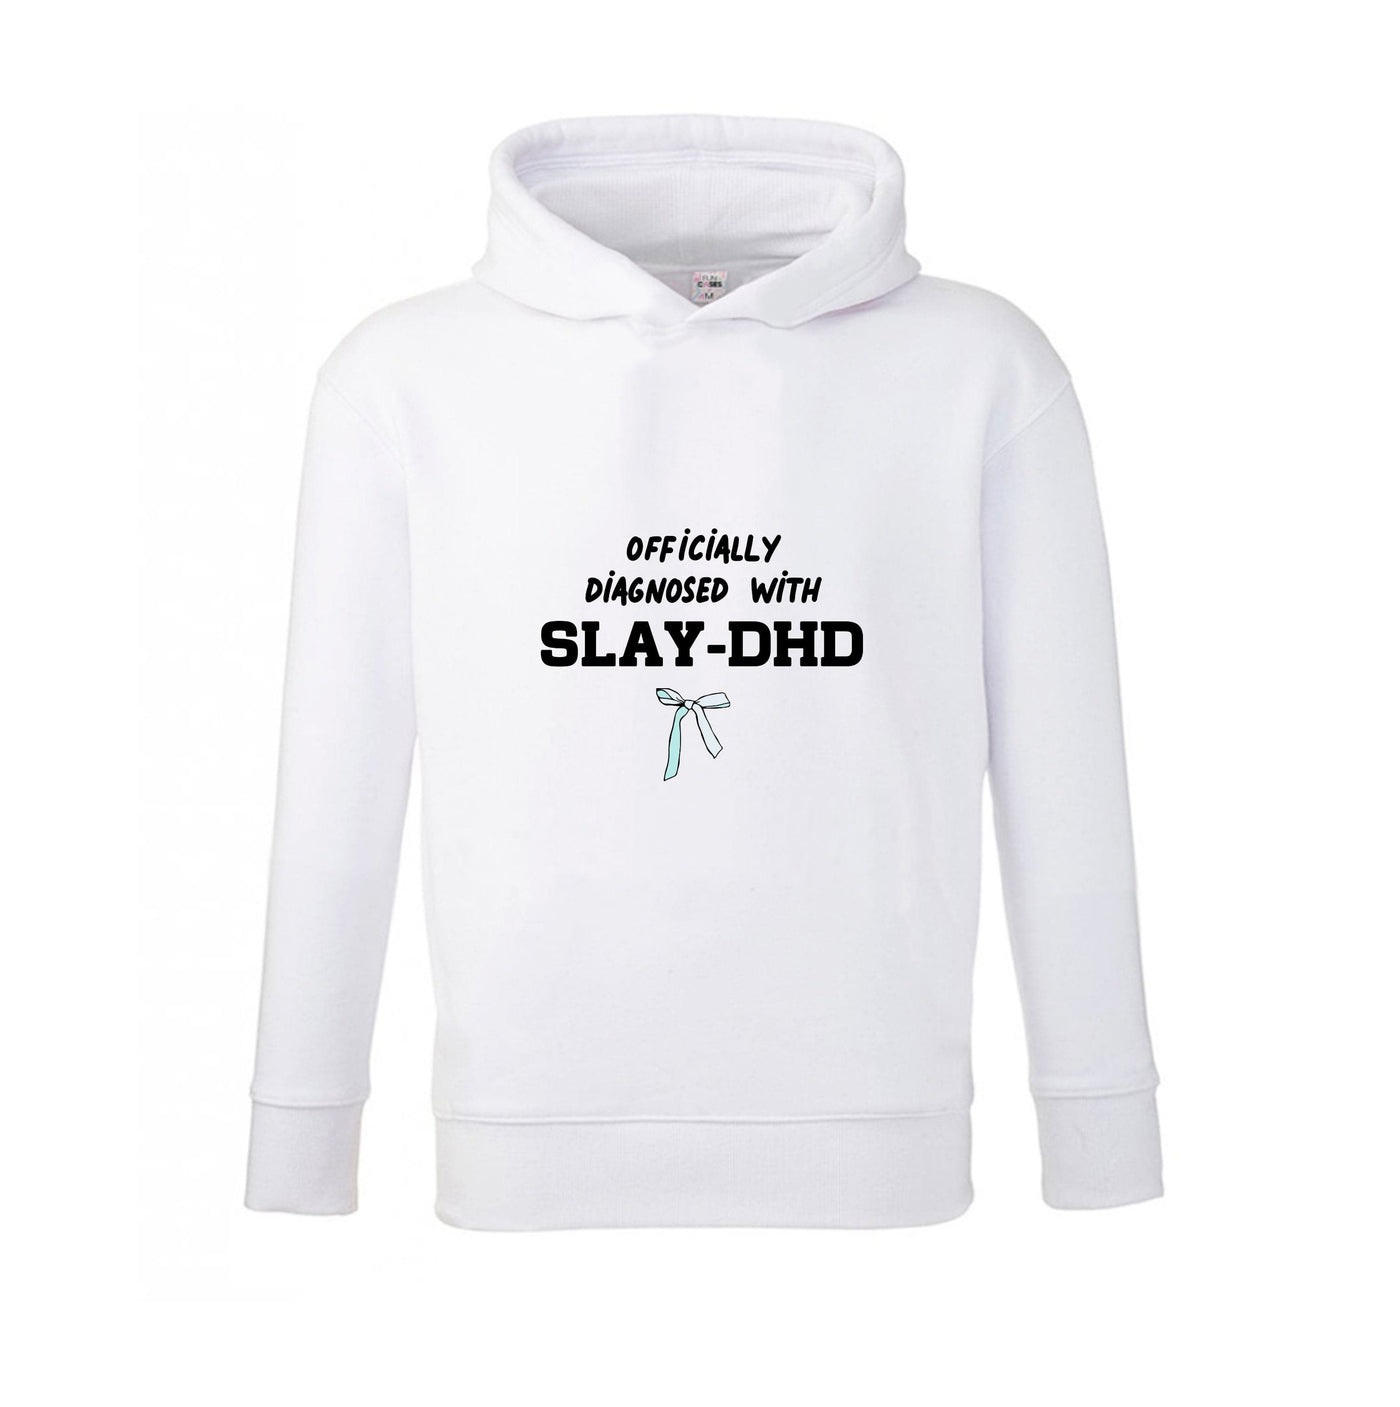 Officially Diagnosed With Slay-DHD - TikTok Trends Kids Hoodie